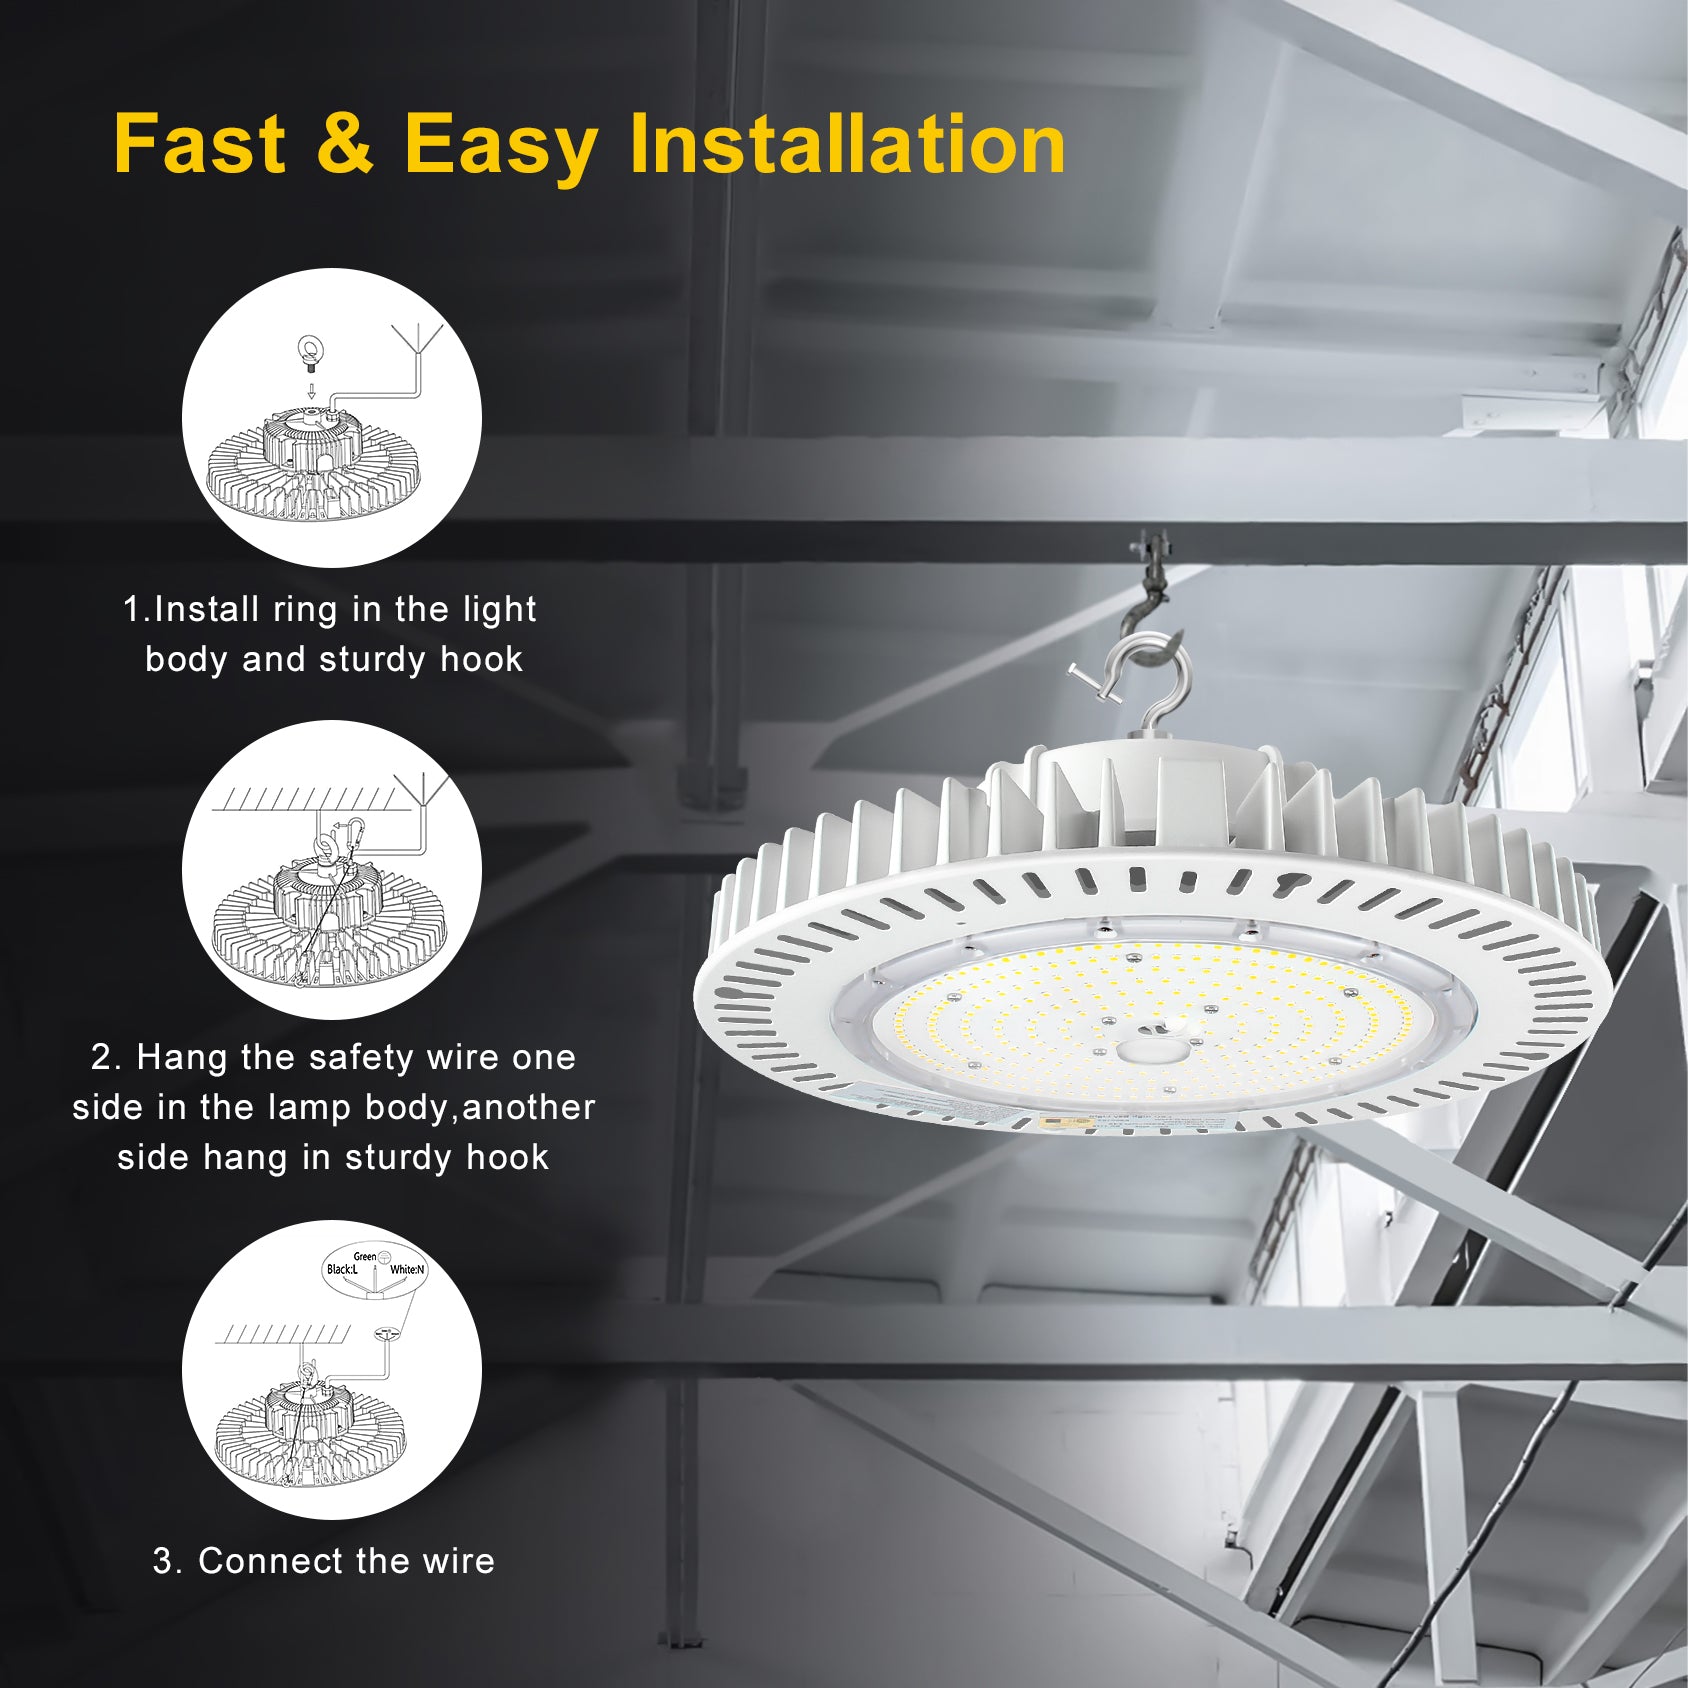 200W LED UFO High Bay Light: 5000K, 28000 Lumens, Dimmable, IP65, UL/DLC Premium, Wide 120° Beam Angle for Industrial Illumination - Eco LED Lightings 